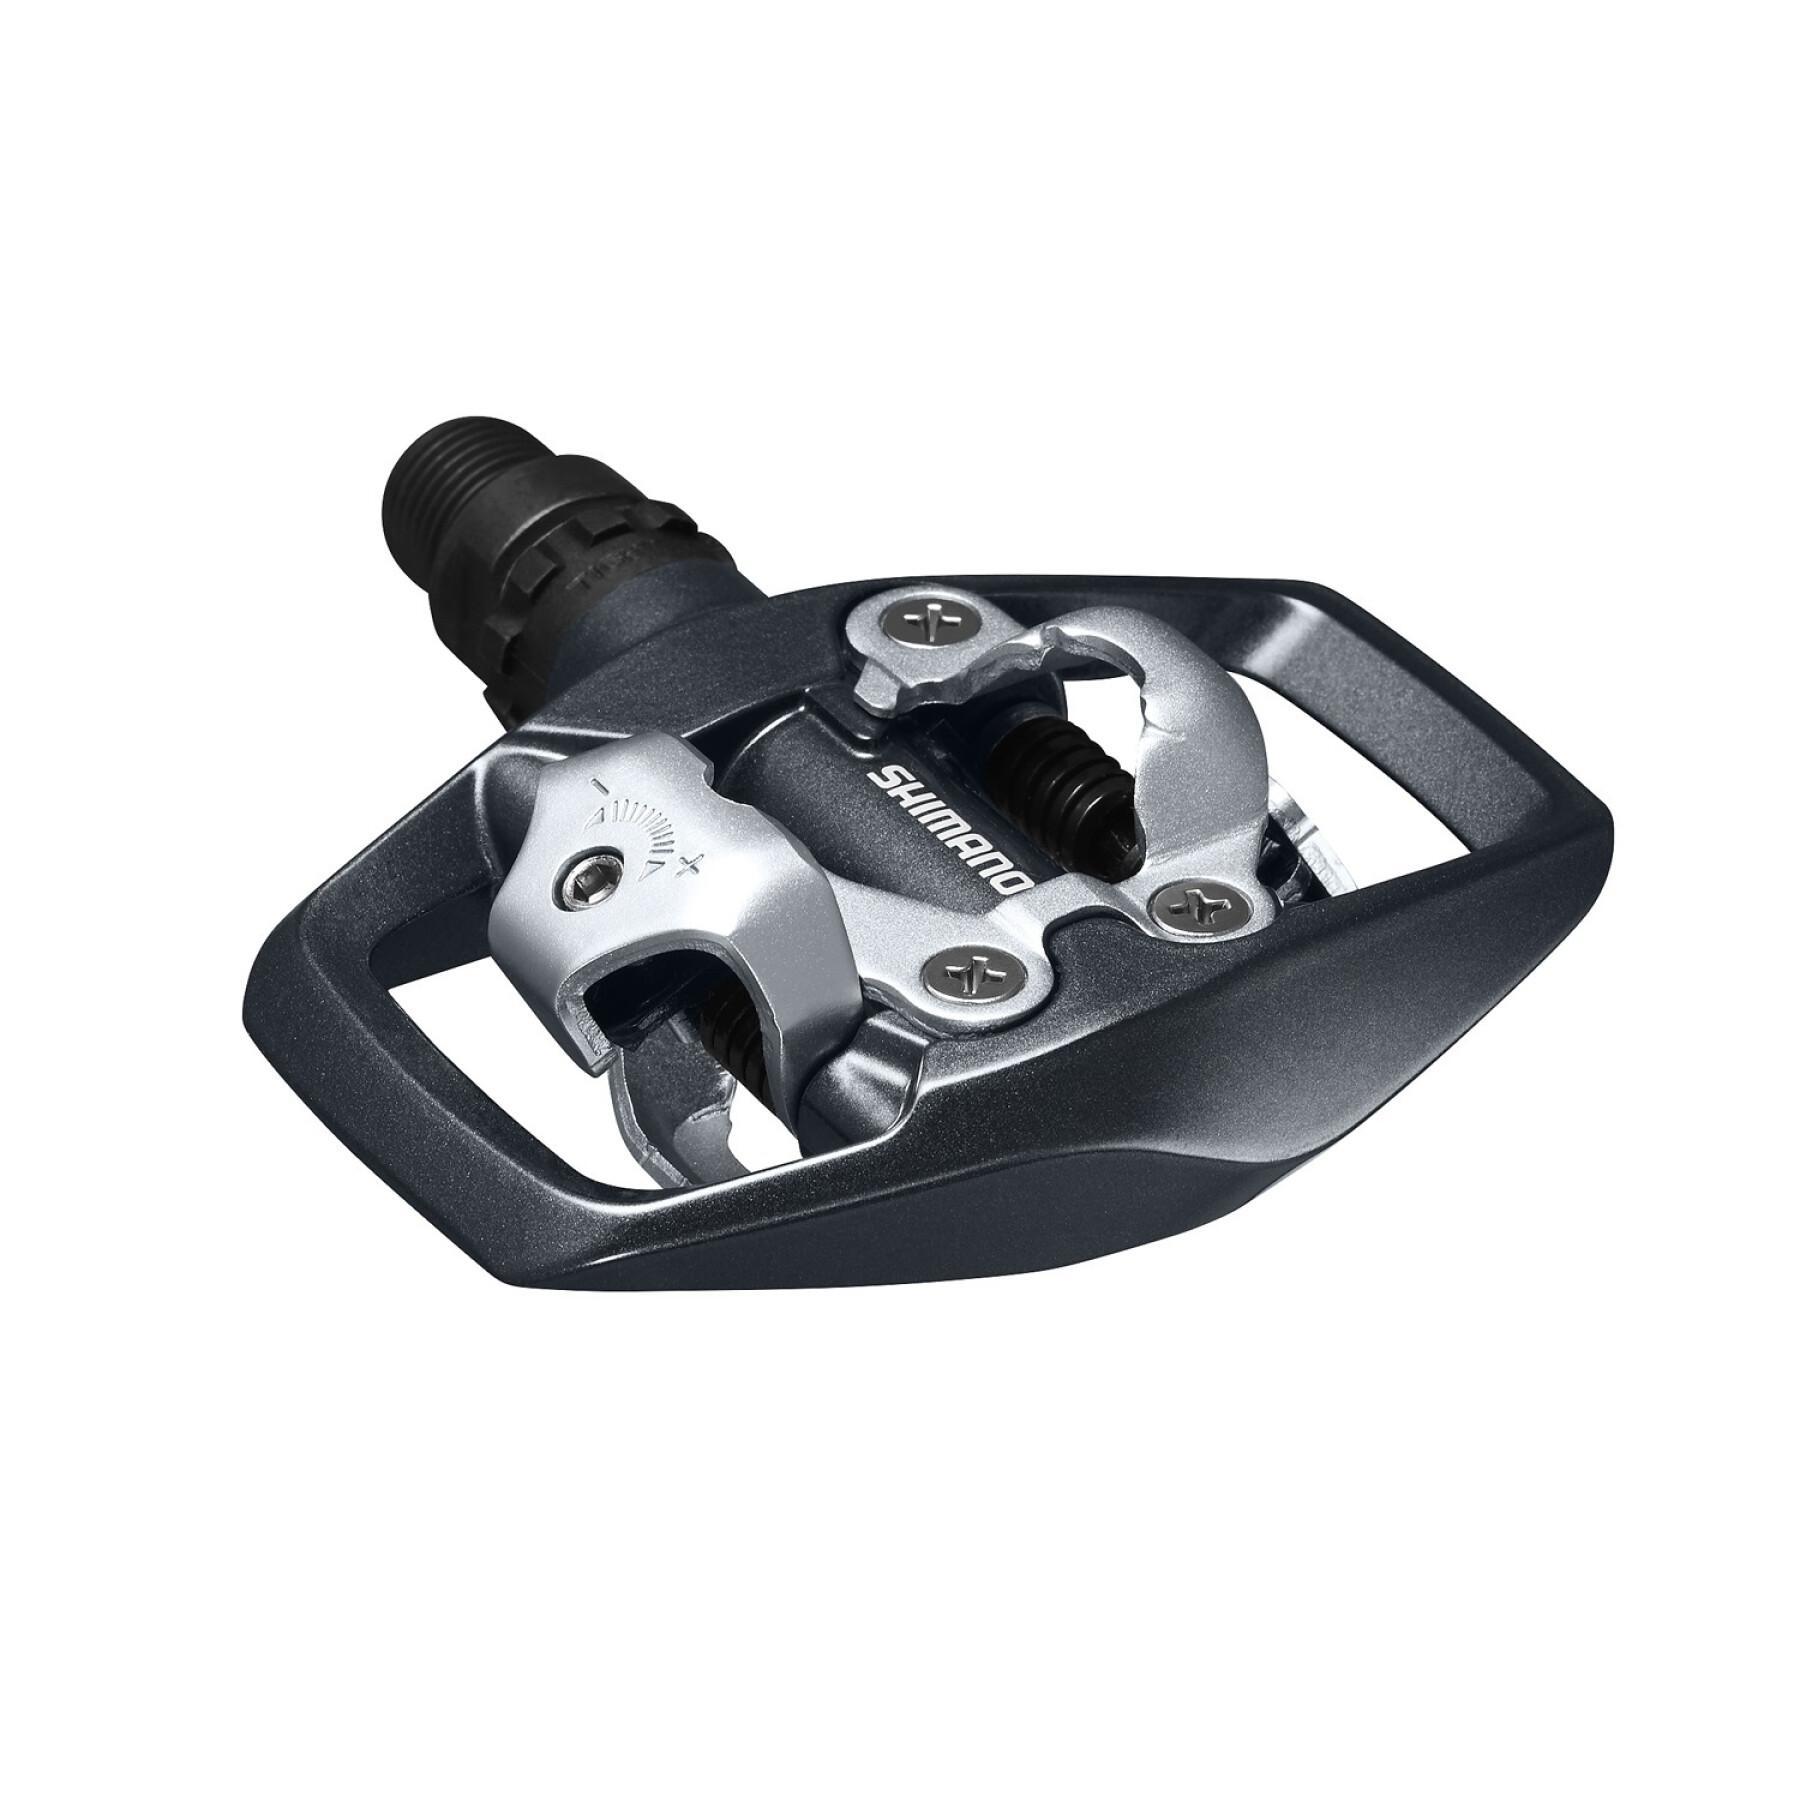 Pedals without reflector including wedges Shimano SPD PD-ED500 9/16" Sm-Sh56